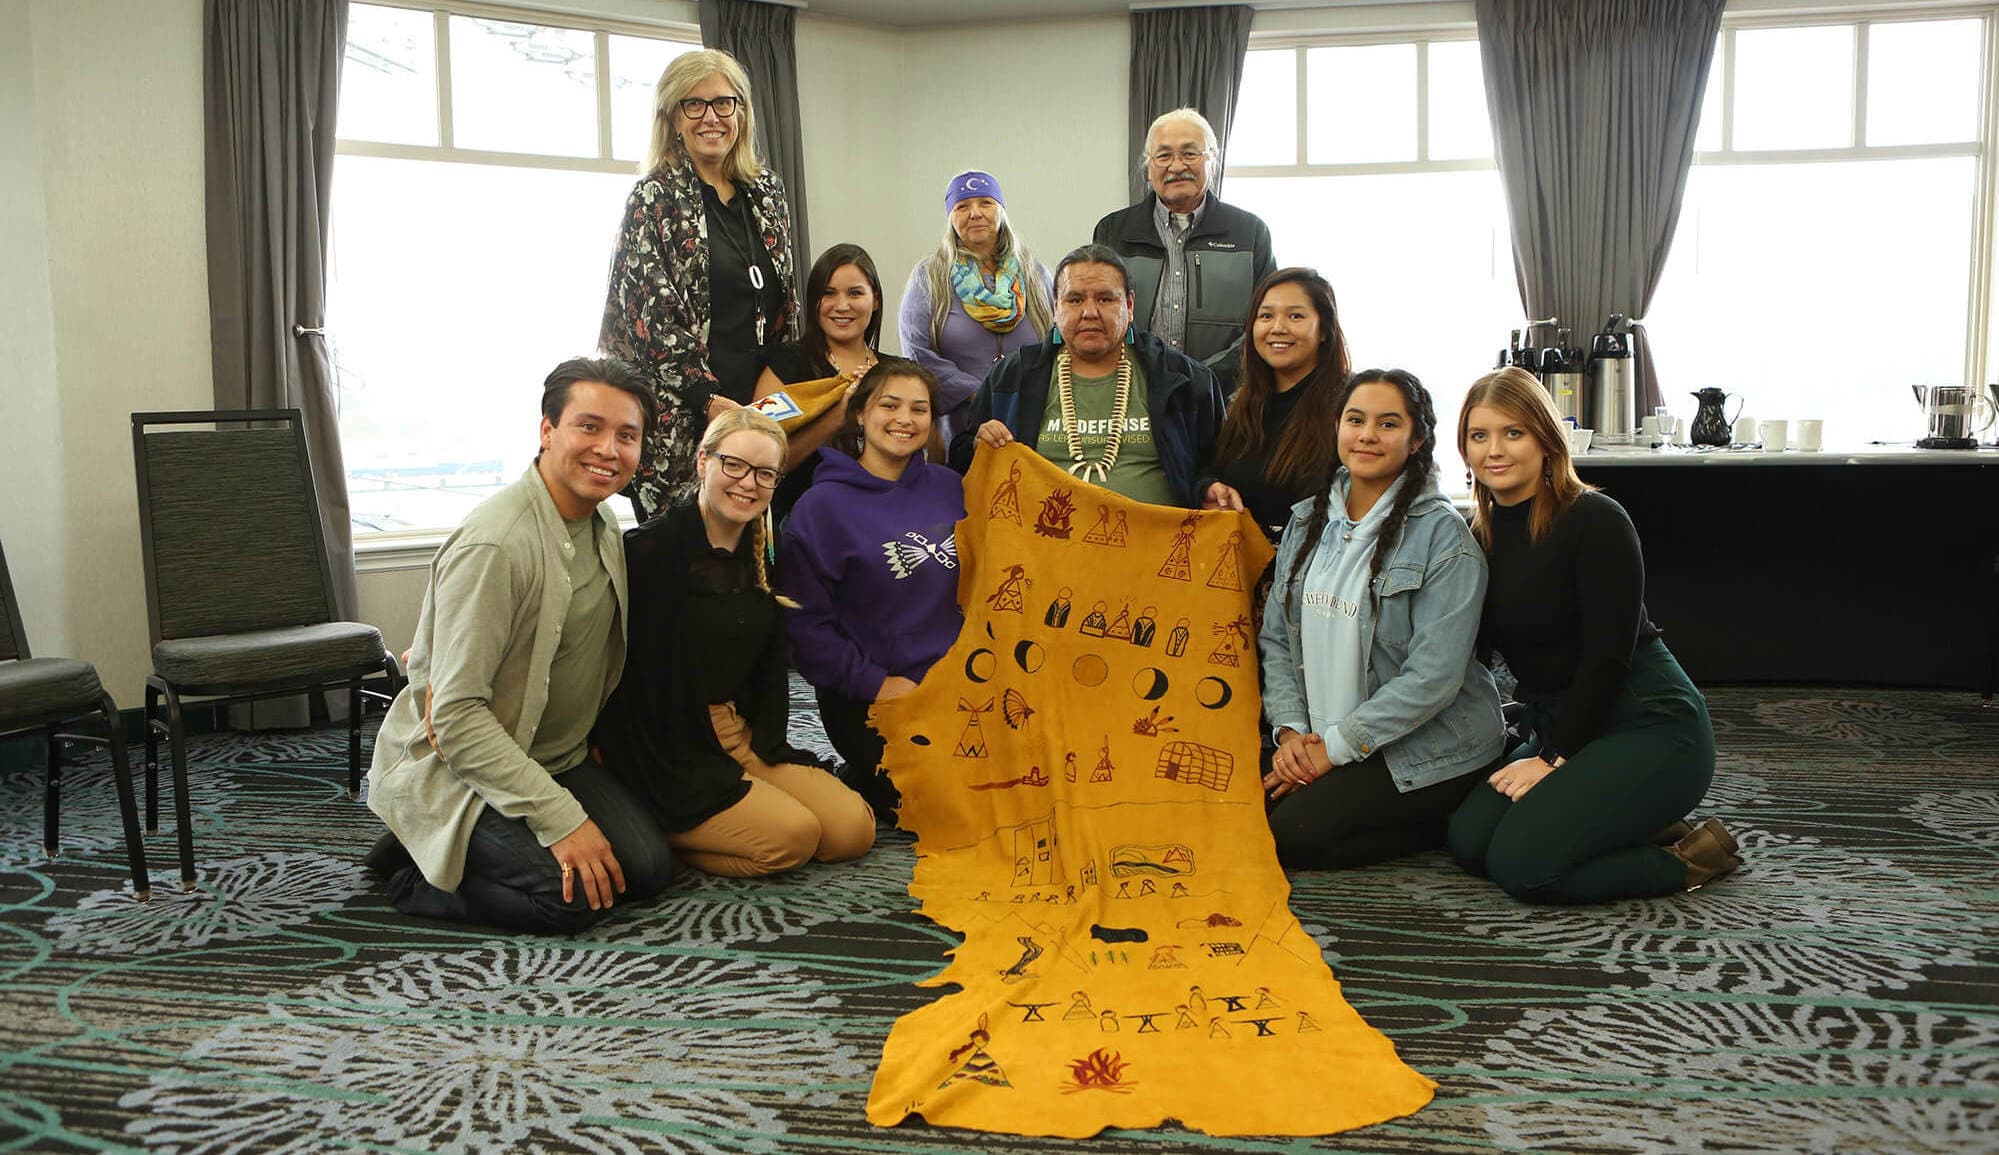 Members of our Indigenous Youth Advisory Council show a moose hide in St. John’s, Newfoundland and Labrador.